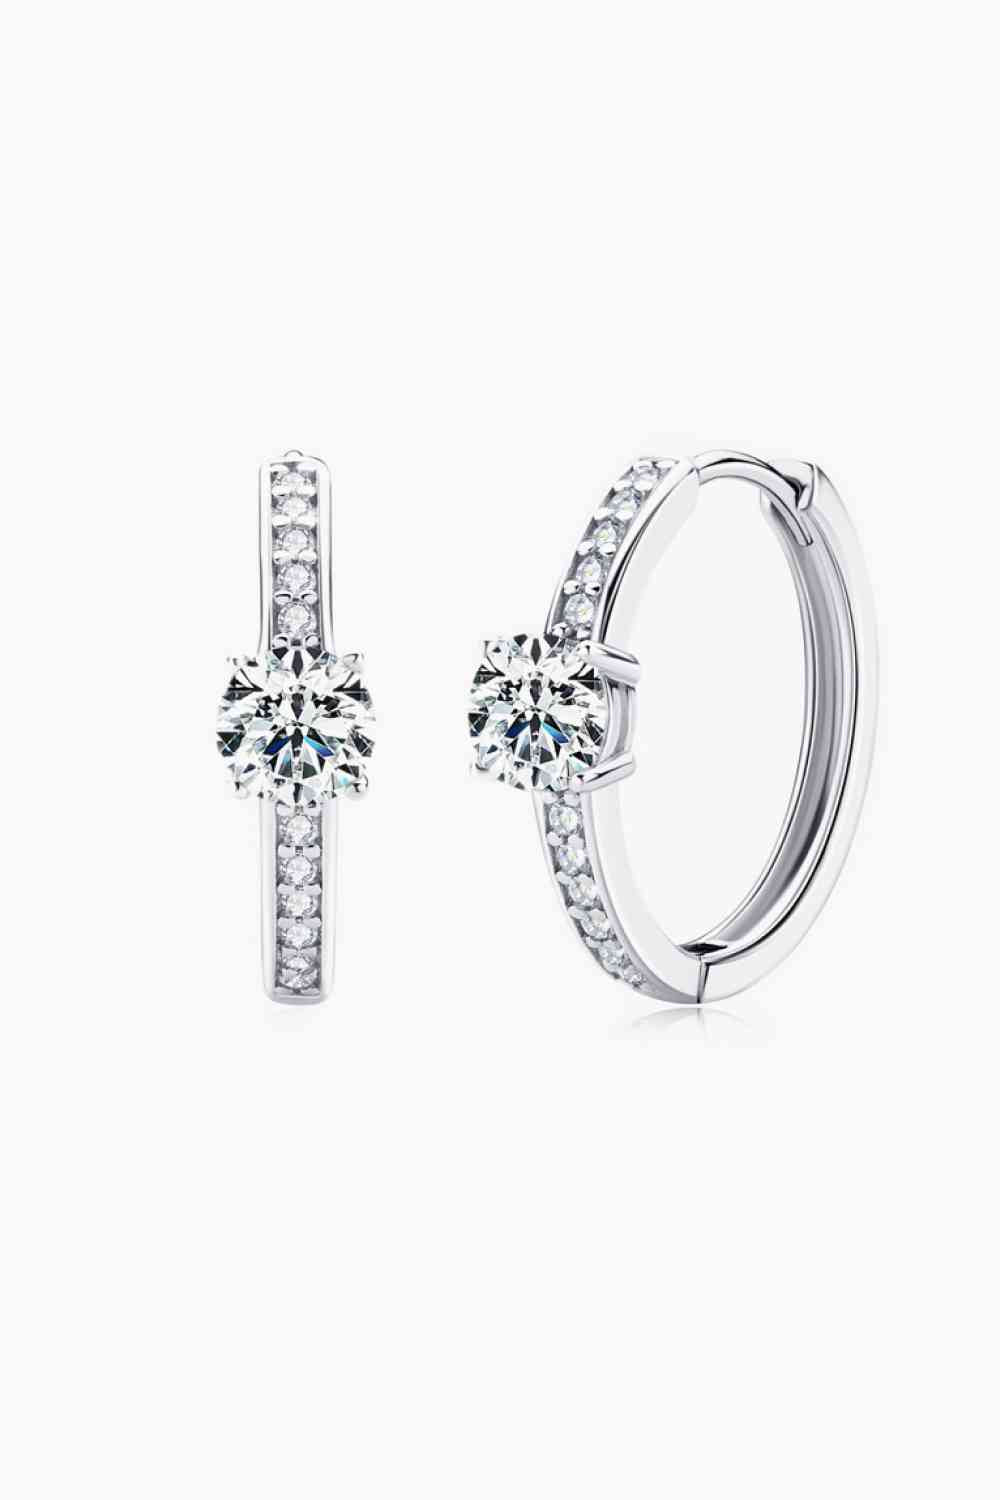 Carry Your Love 1 Carat Moissanite Platinum Plated Earrings